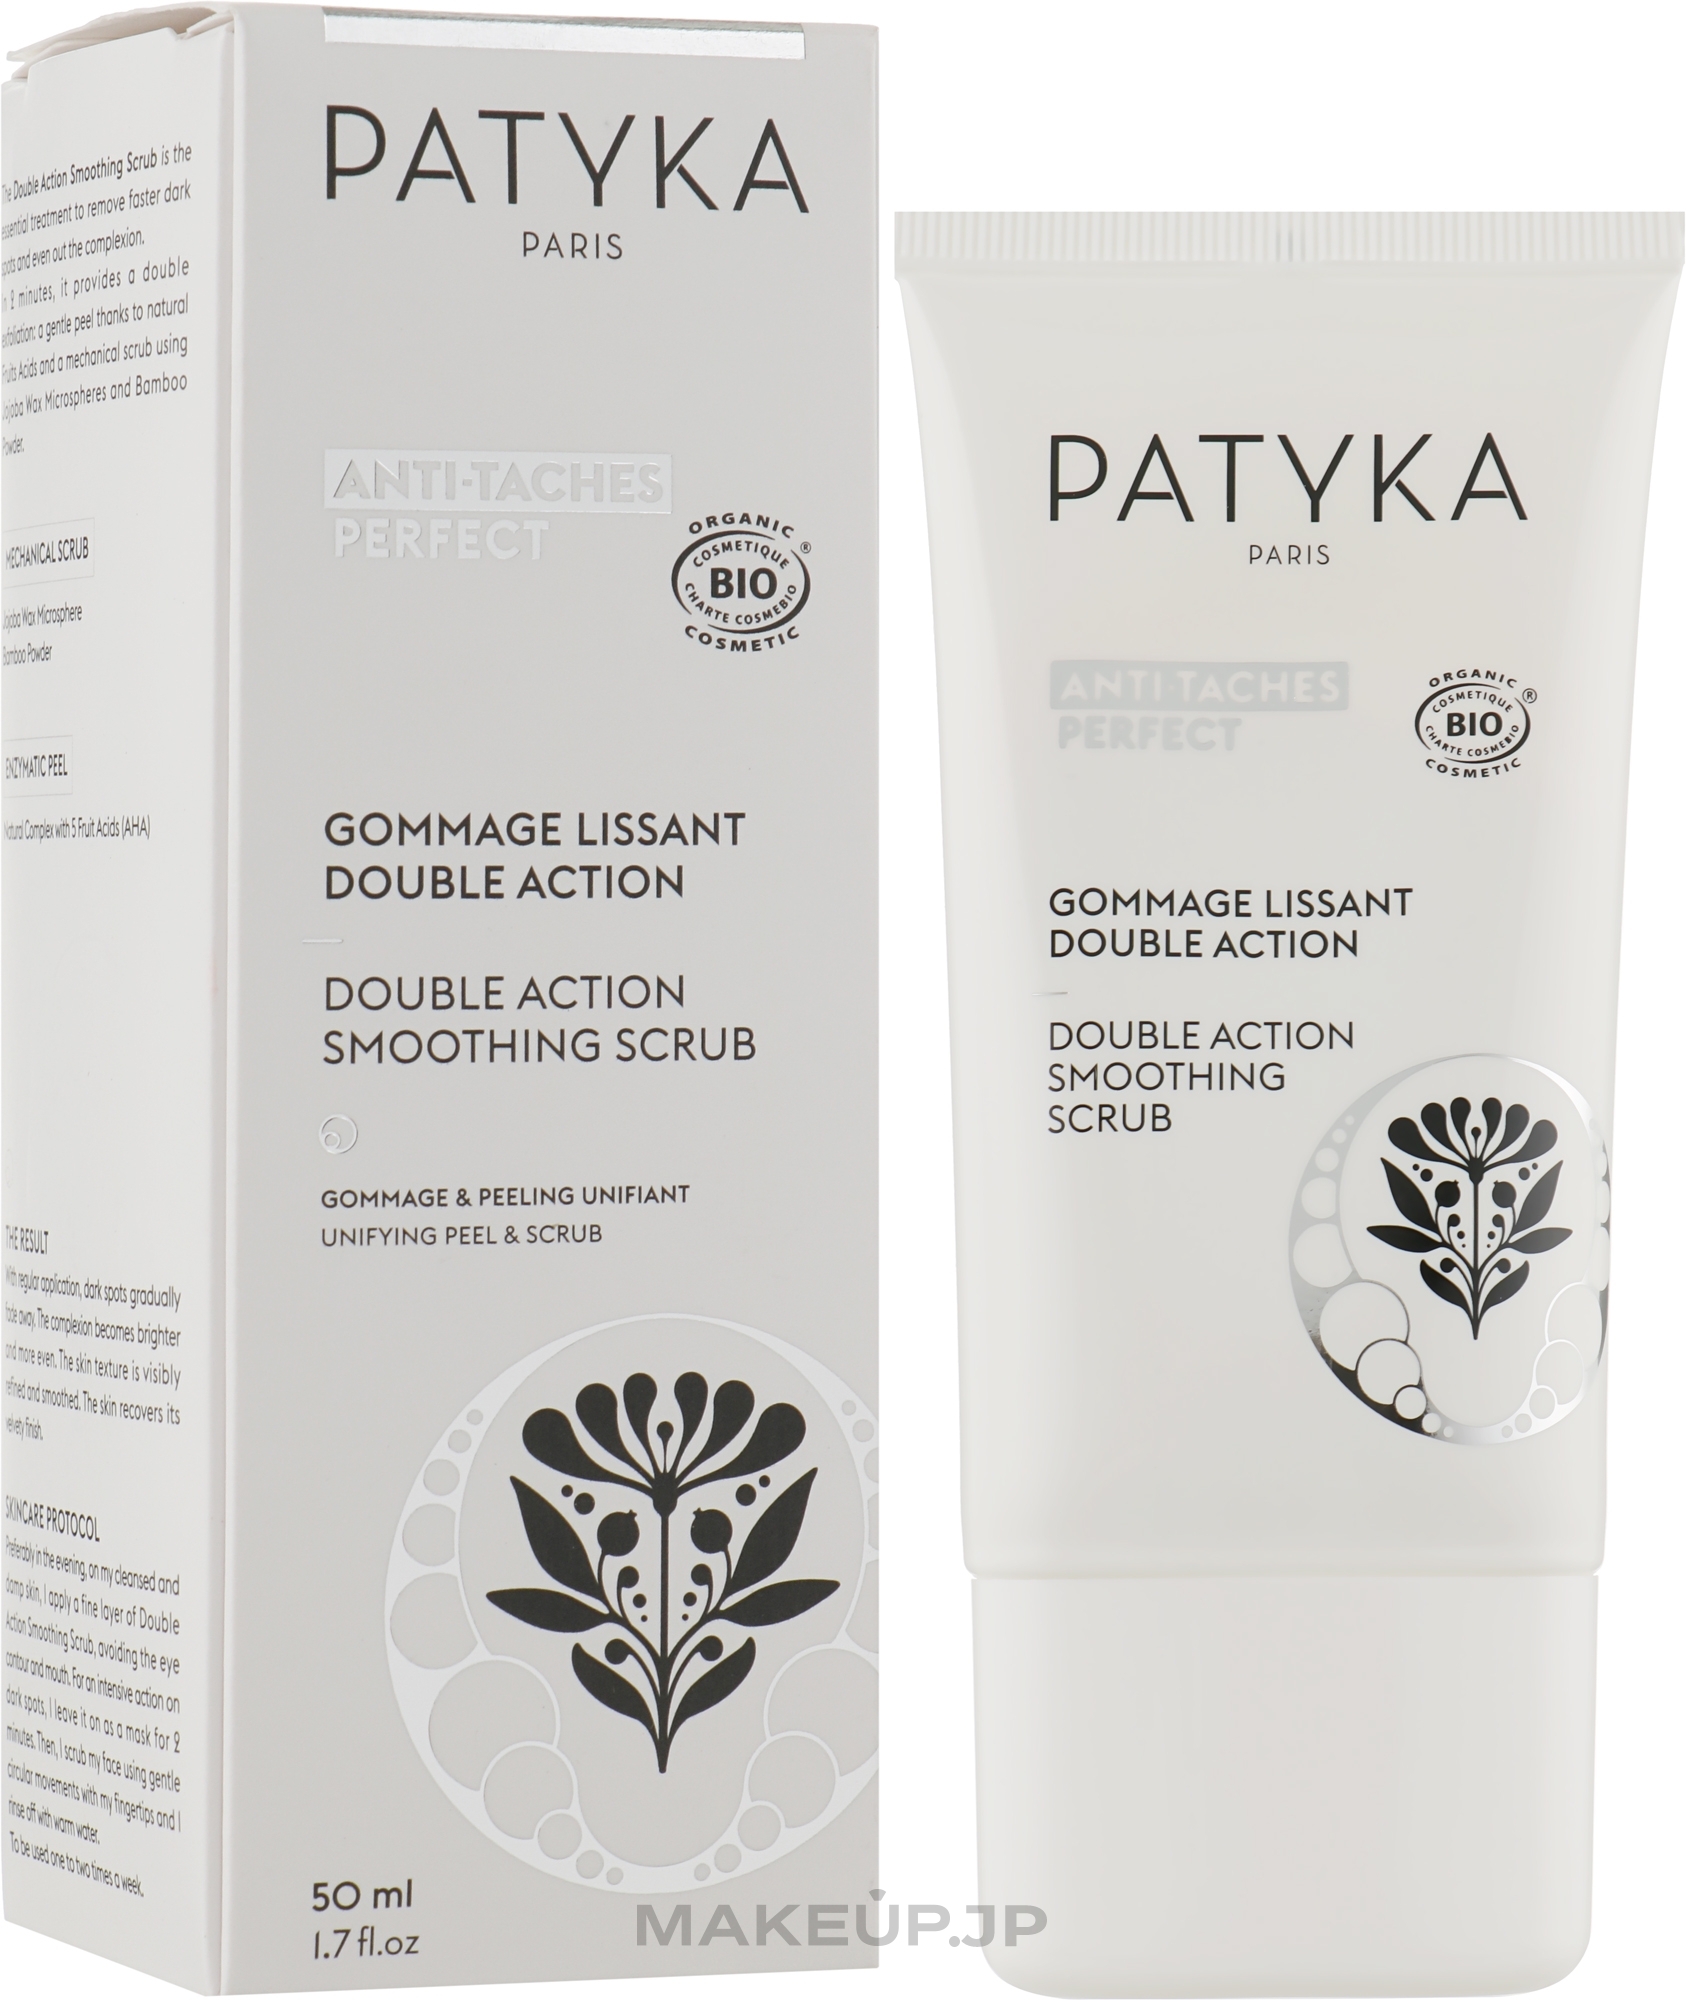 Dual Action Face Gommage - Patyka Anti-Taches Perfect Gommage Lissant Double Action — photo 50 ml